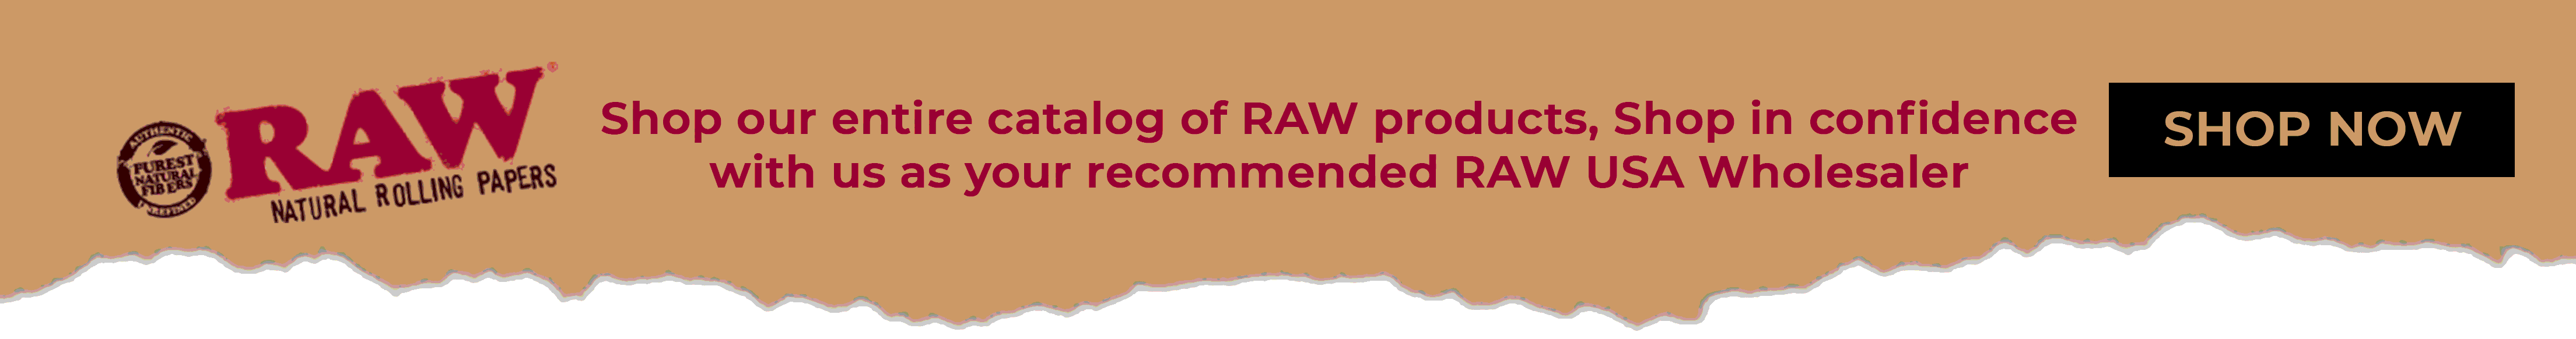 Raw product banner